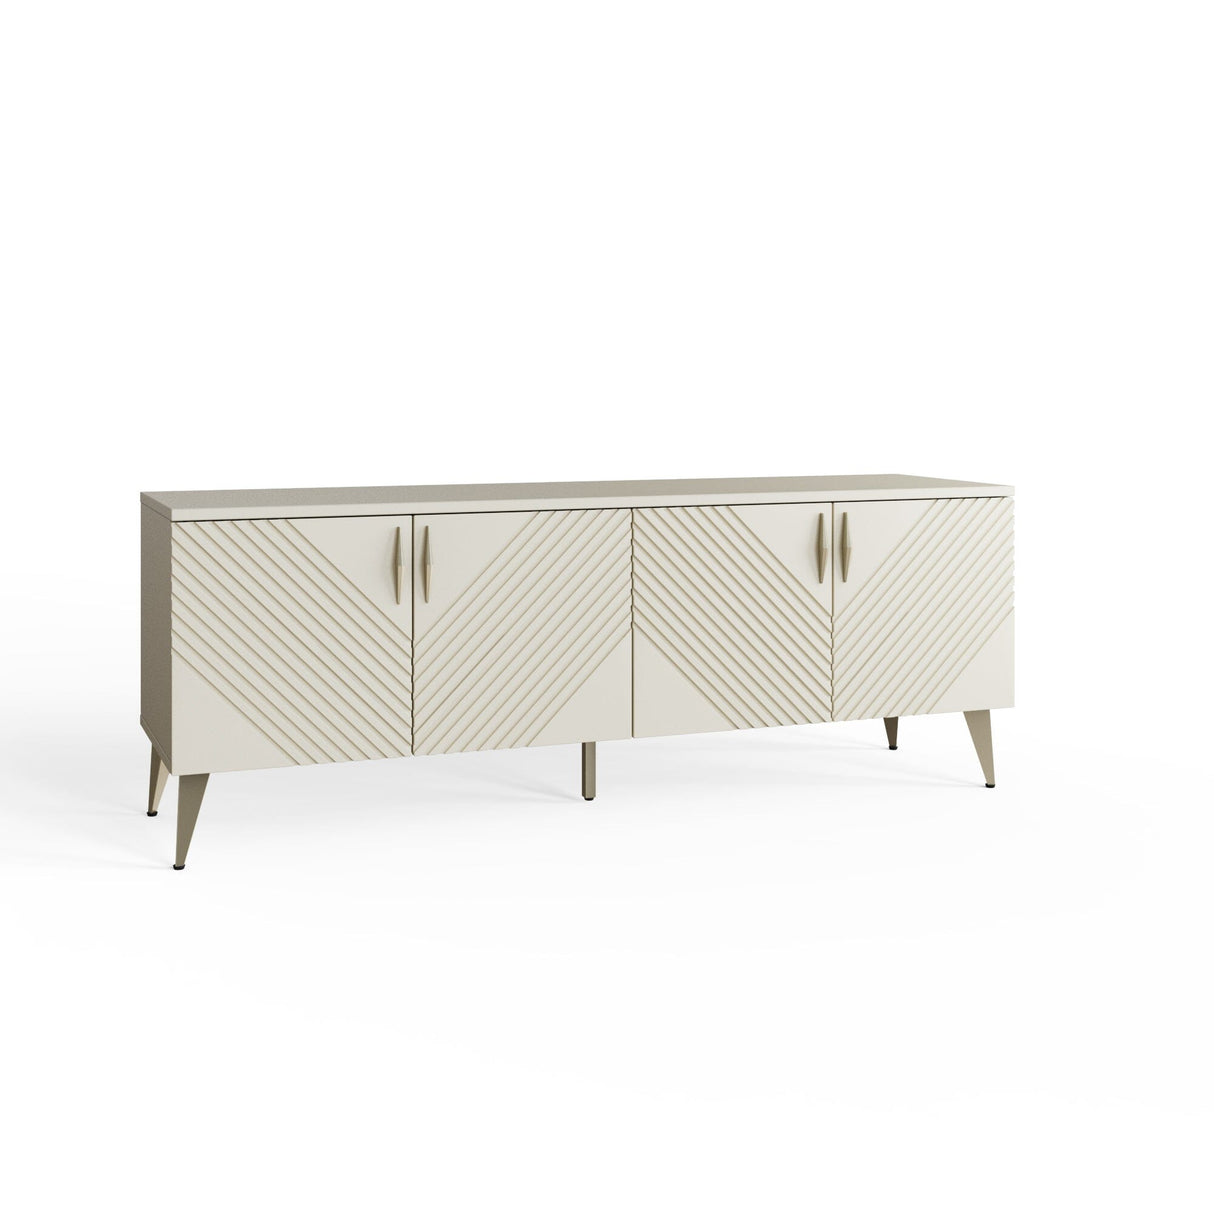 Frank Olsen AVA TV Cabinet with Mood Lighting for TV's up to 70"